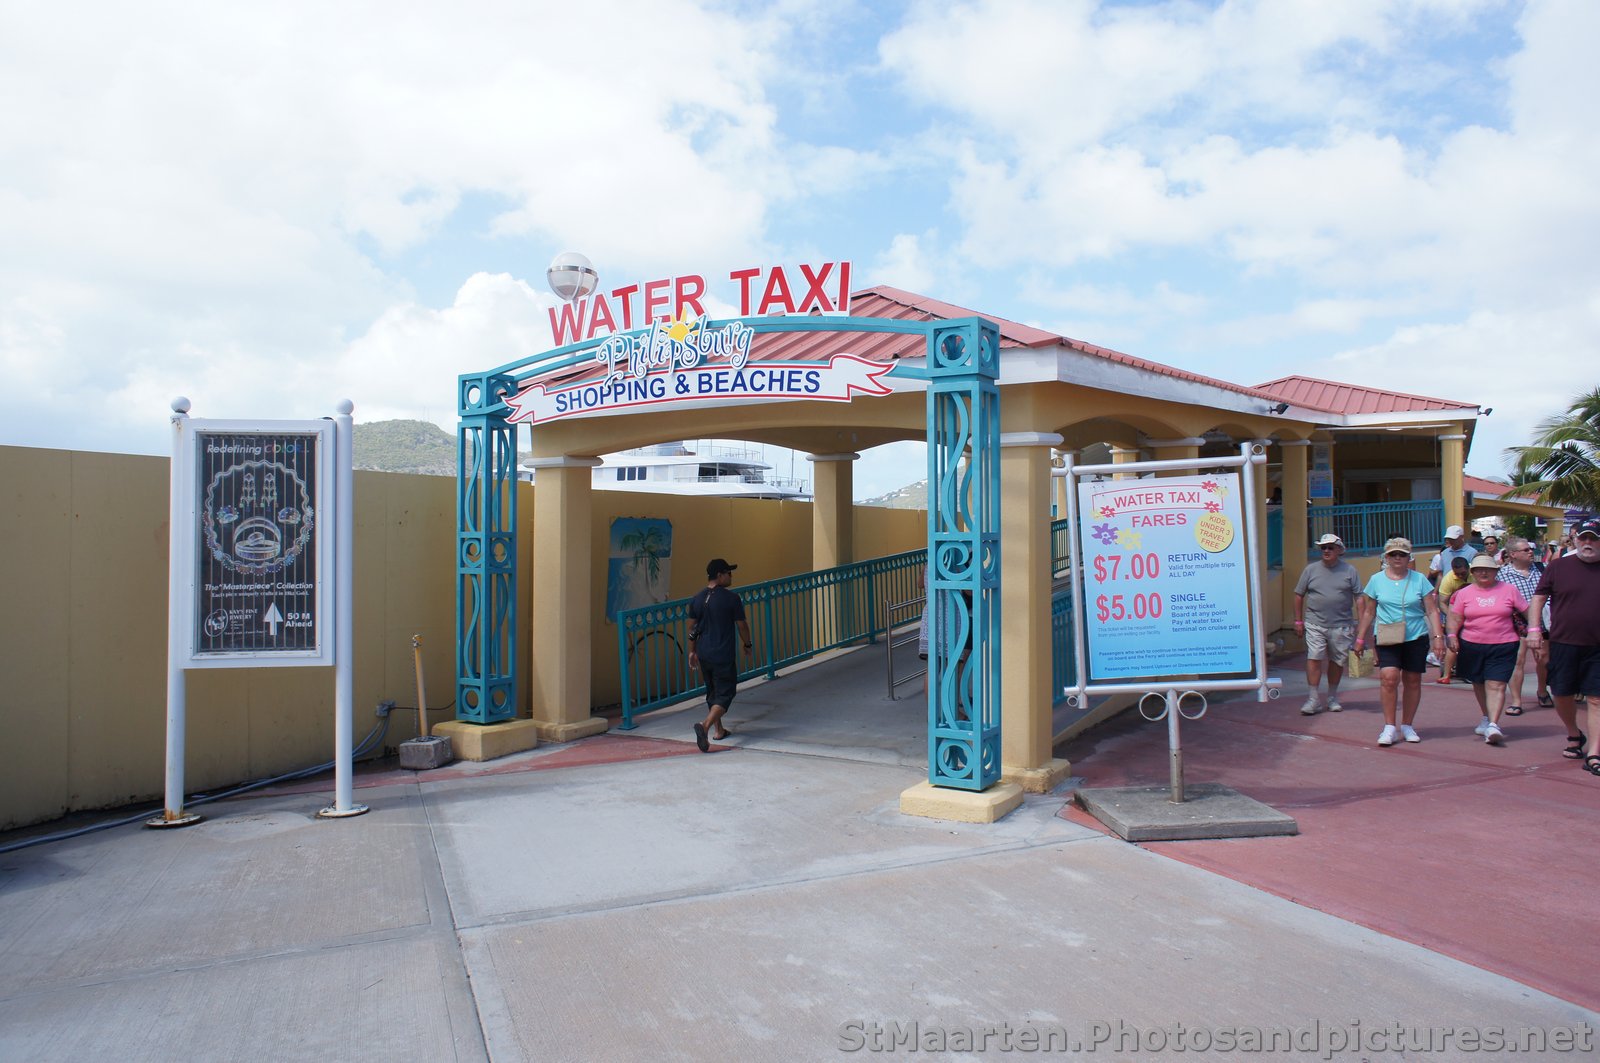 Water Taxi to downtown and uptown Philipsburg plus pricing.jpg
